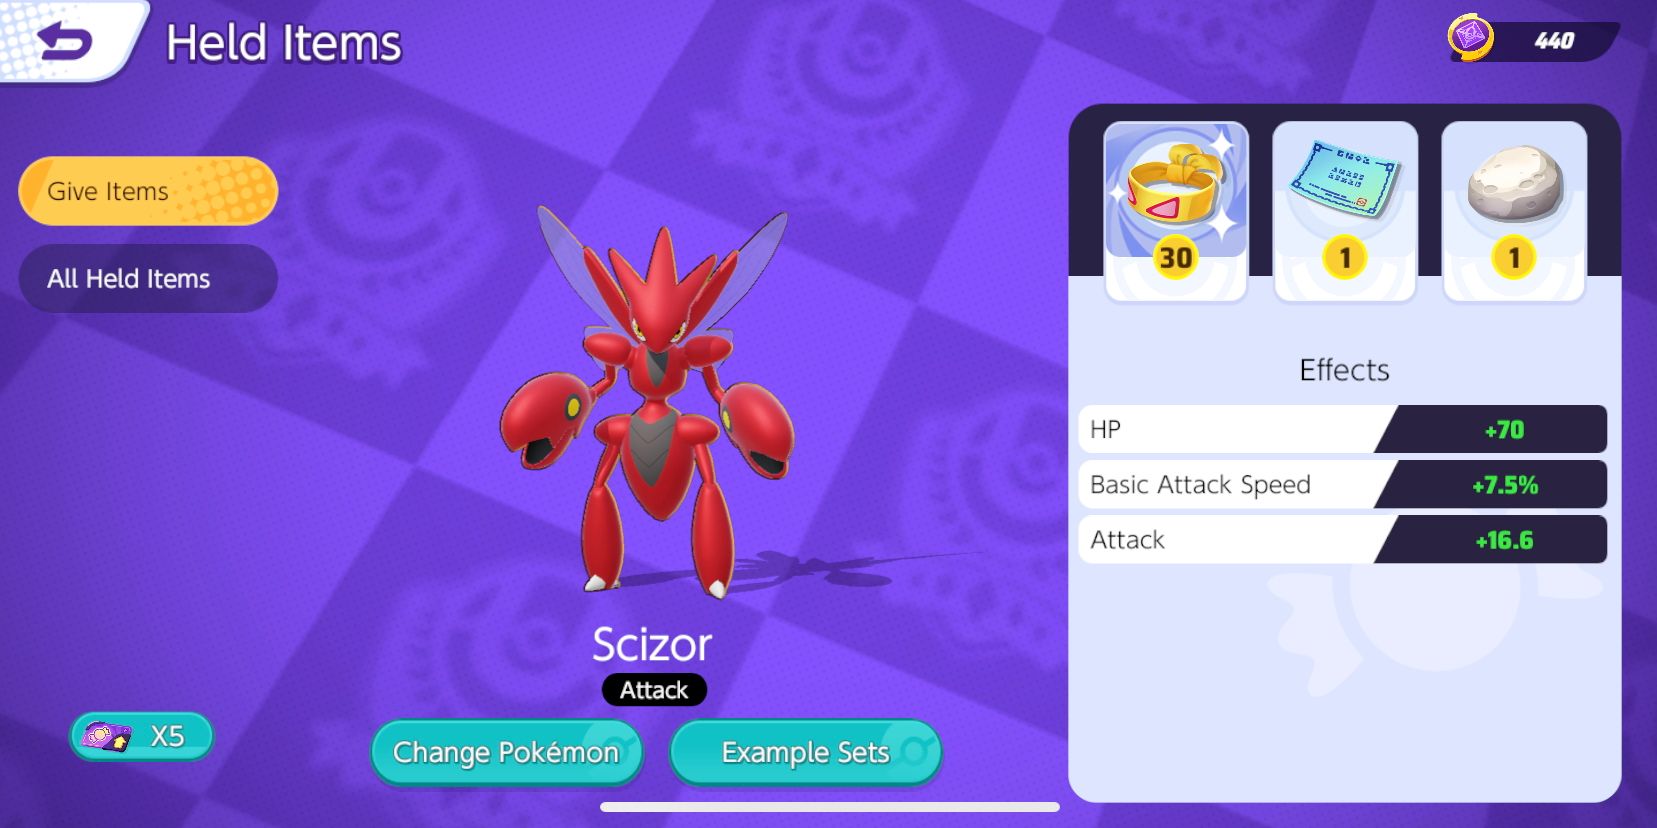 Scizor Held Item selection screen, with Muscle Band, Weakness Policy, and Float Stone selected